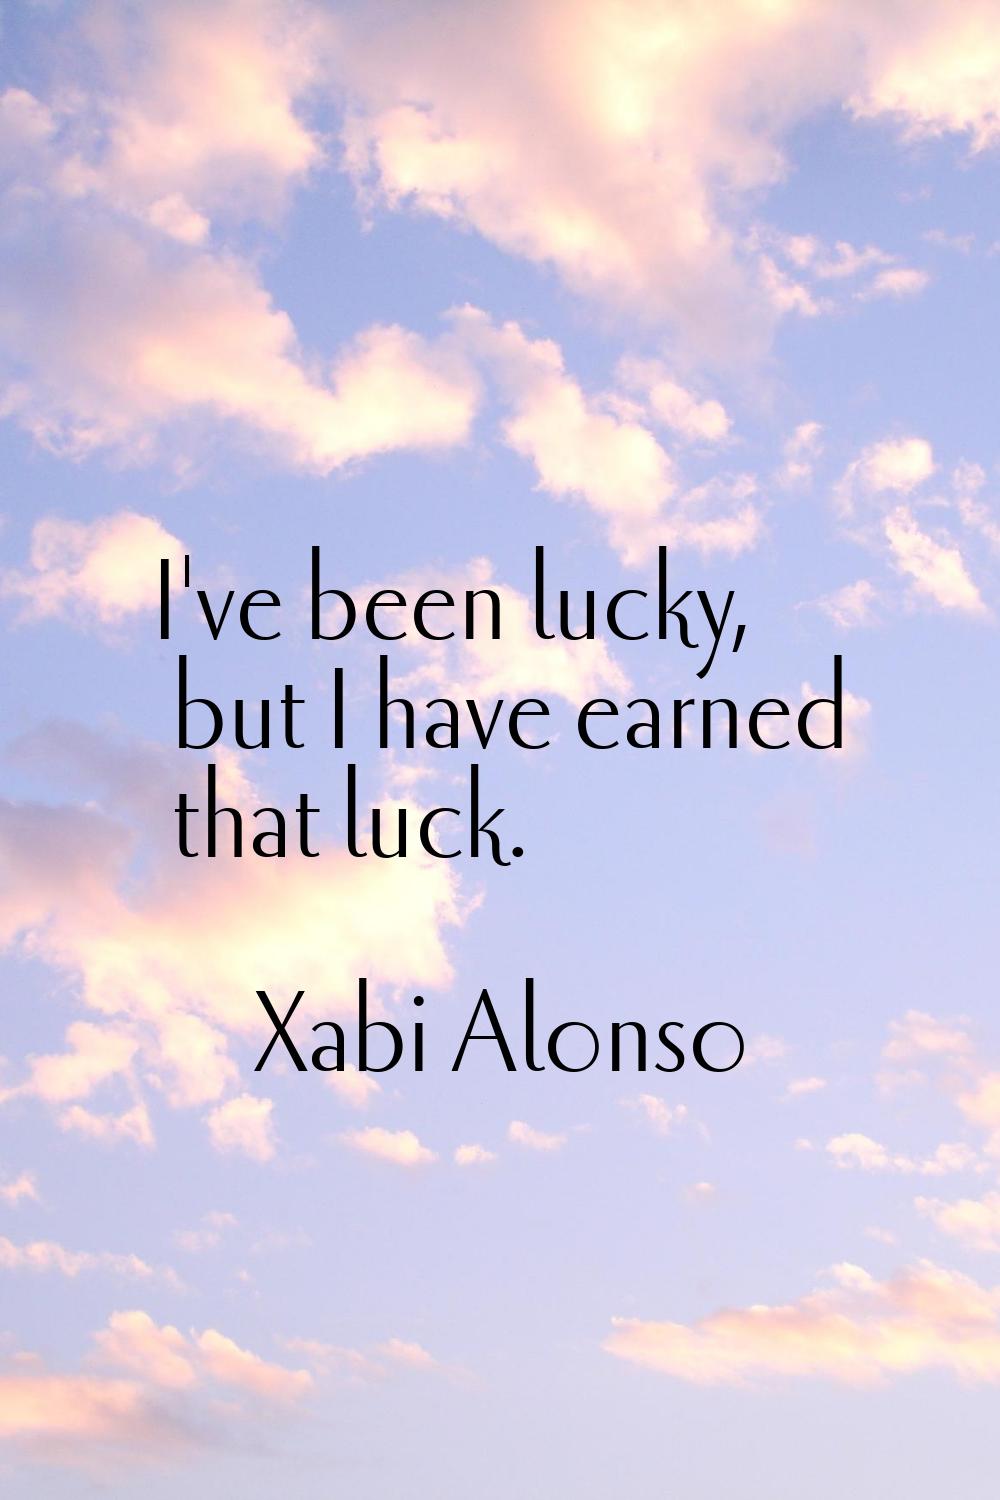 I've been lucky, but I have earned that luck.